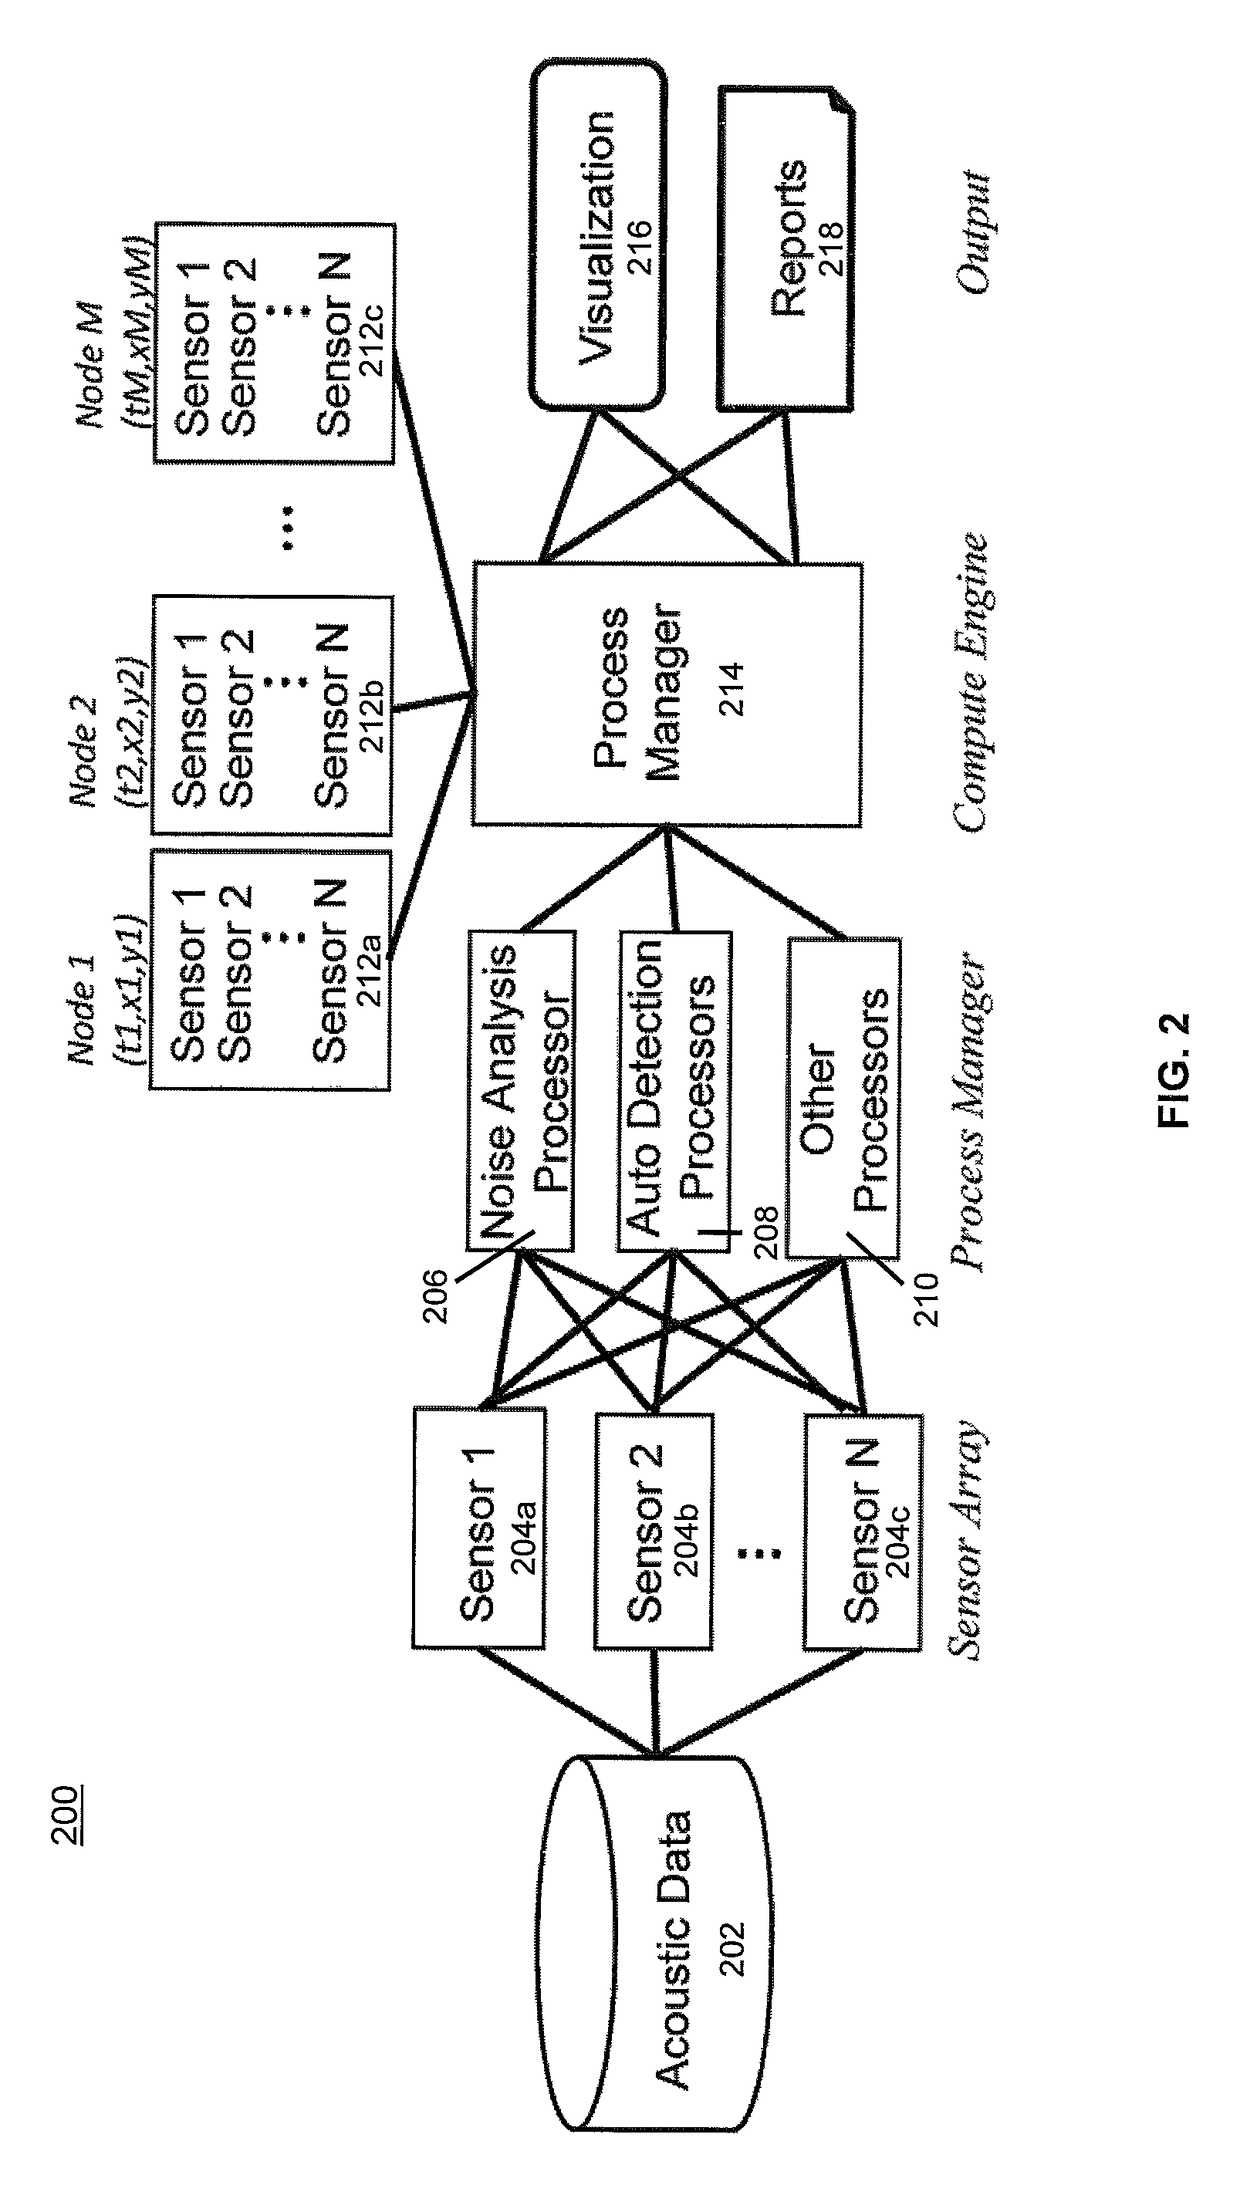 System and methods of acoustic monitoring